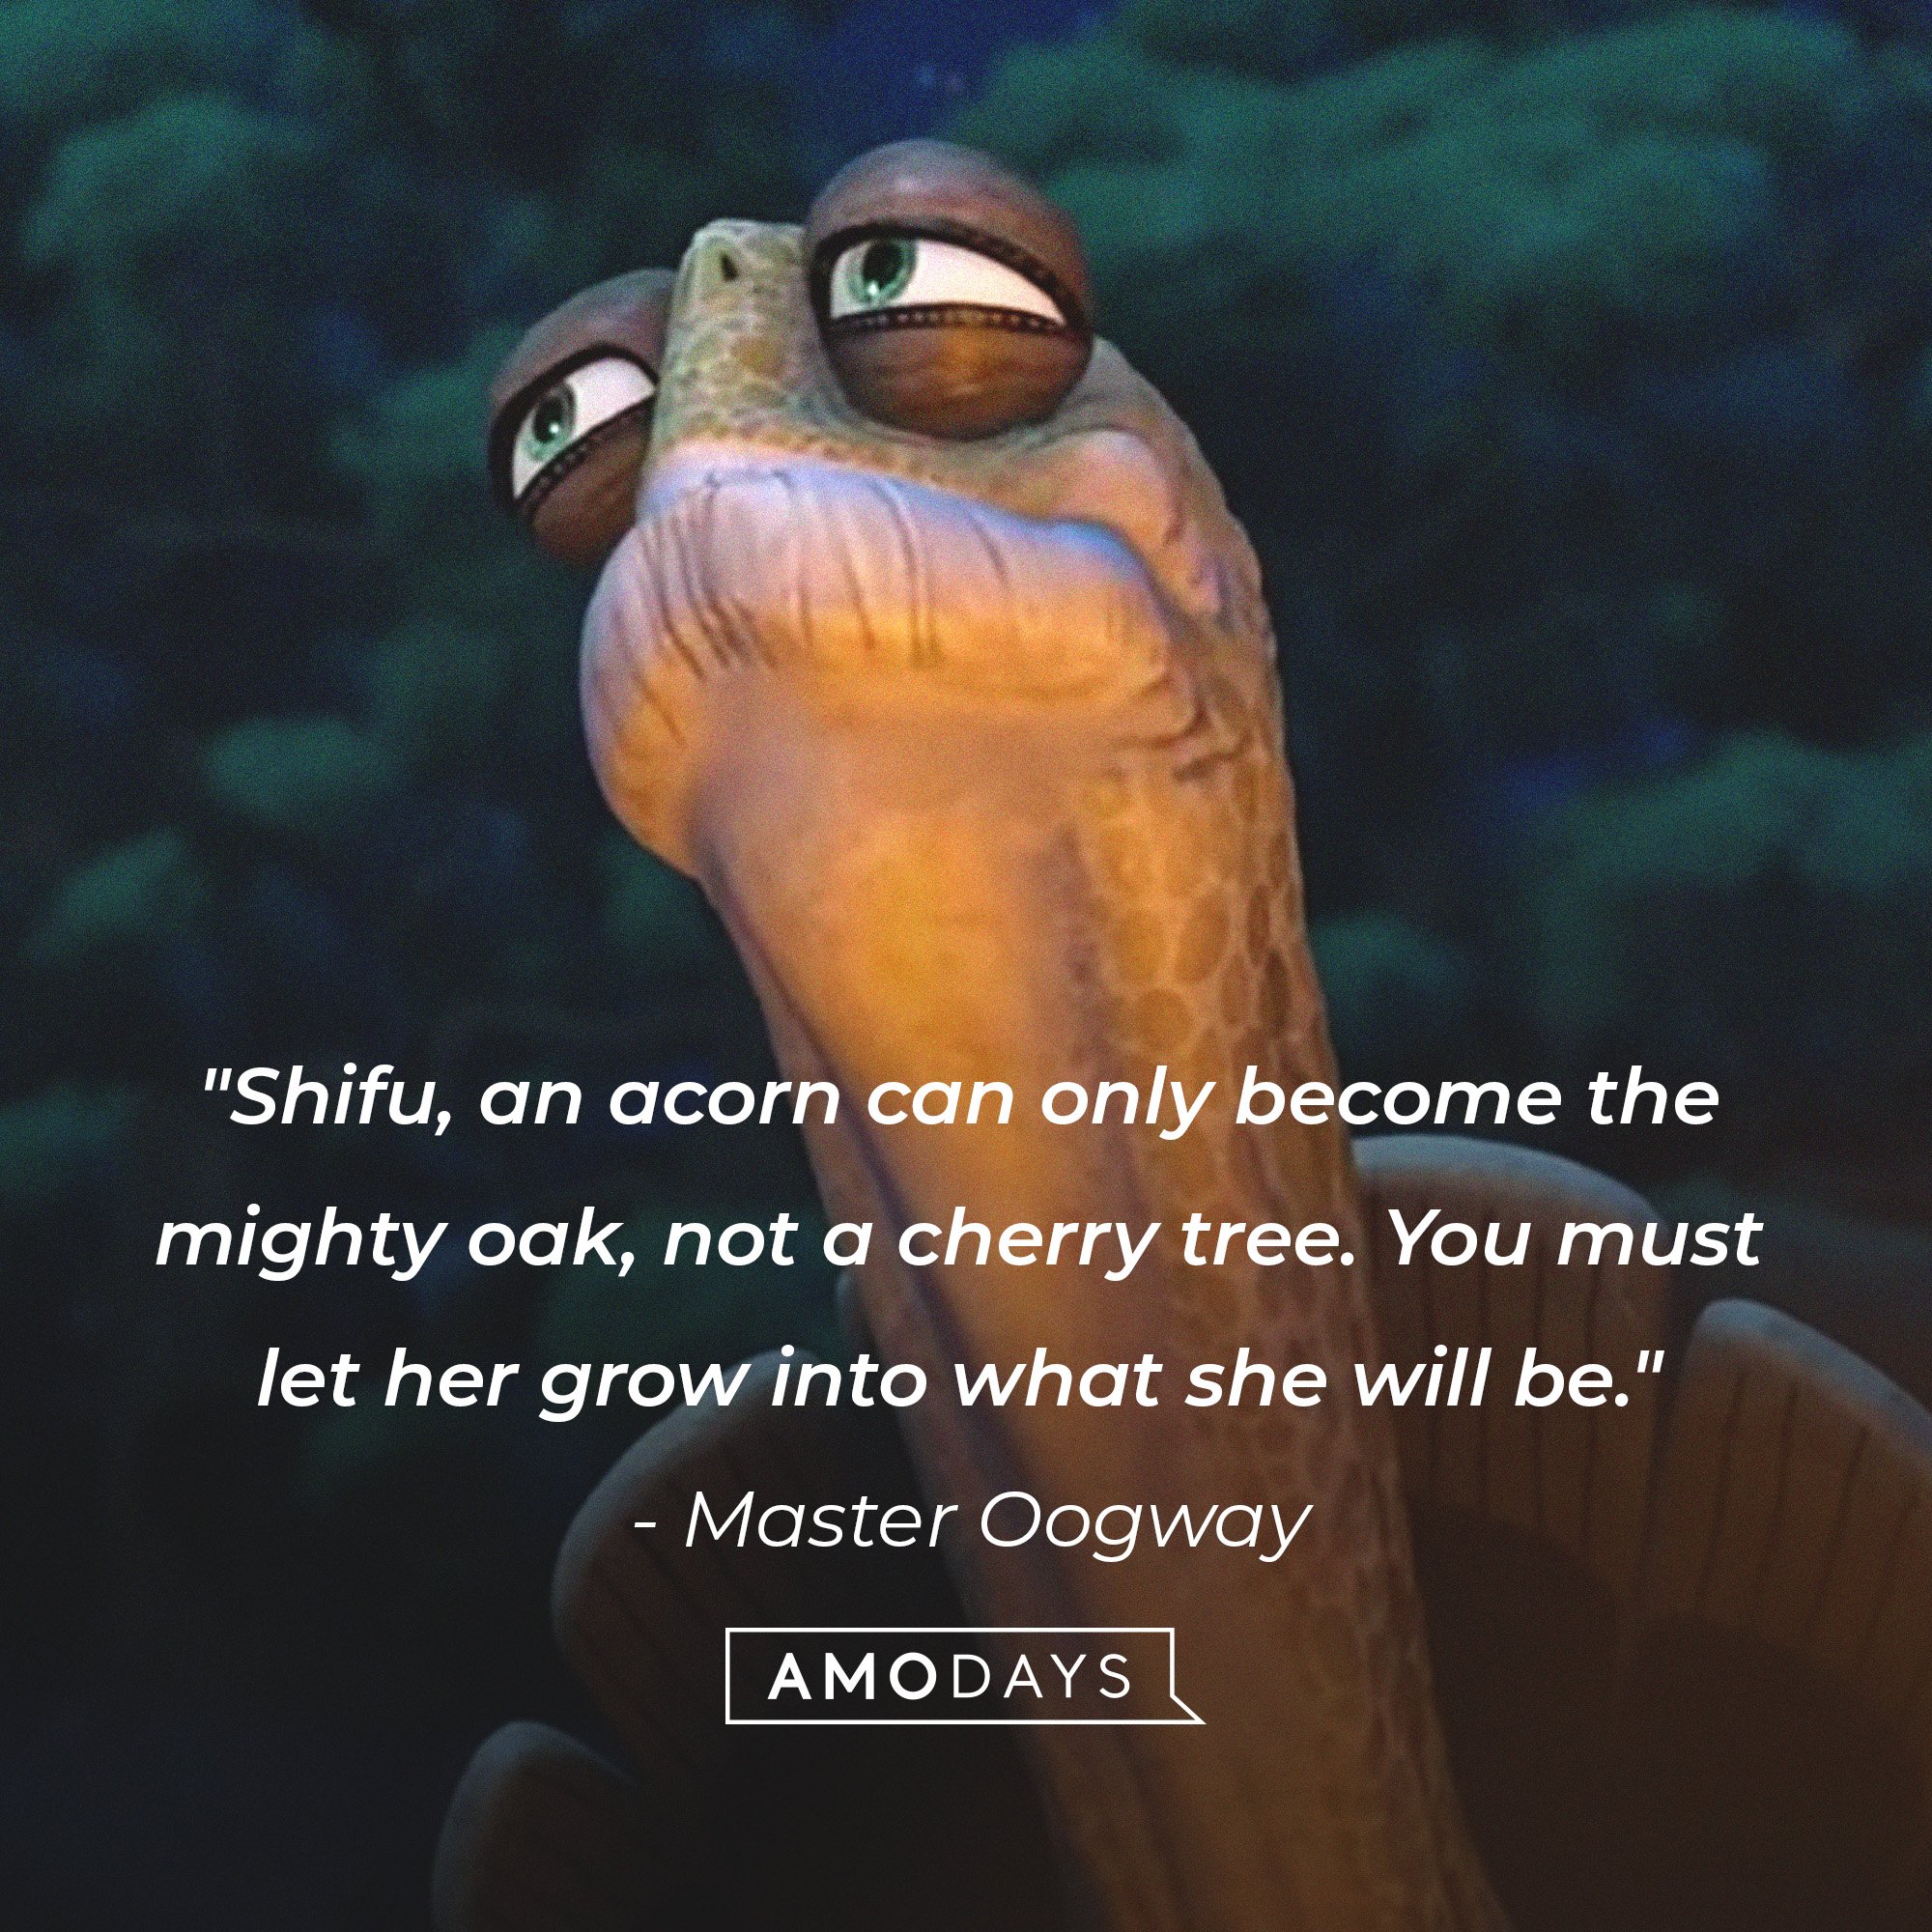 Master Oogway’s quote: "Shifu, an acorn can only become the mighty oak, not a cherry tree. You must let her grow into what she will be." | Image: AmoDays